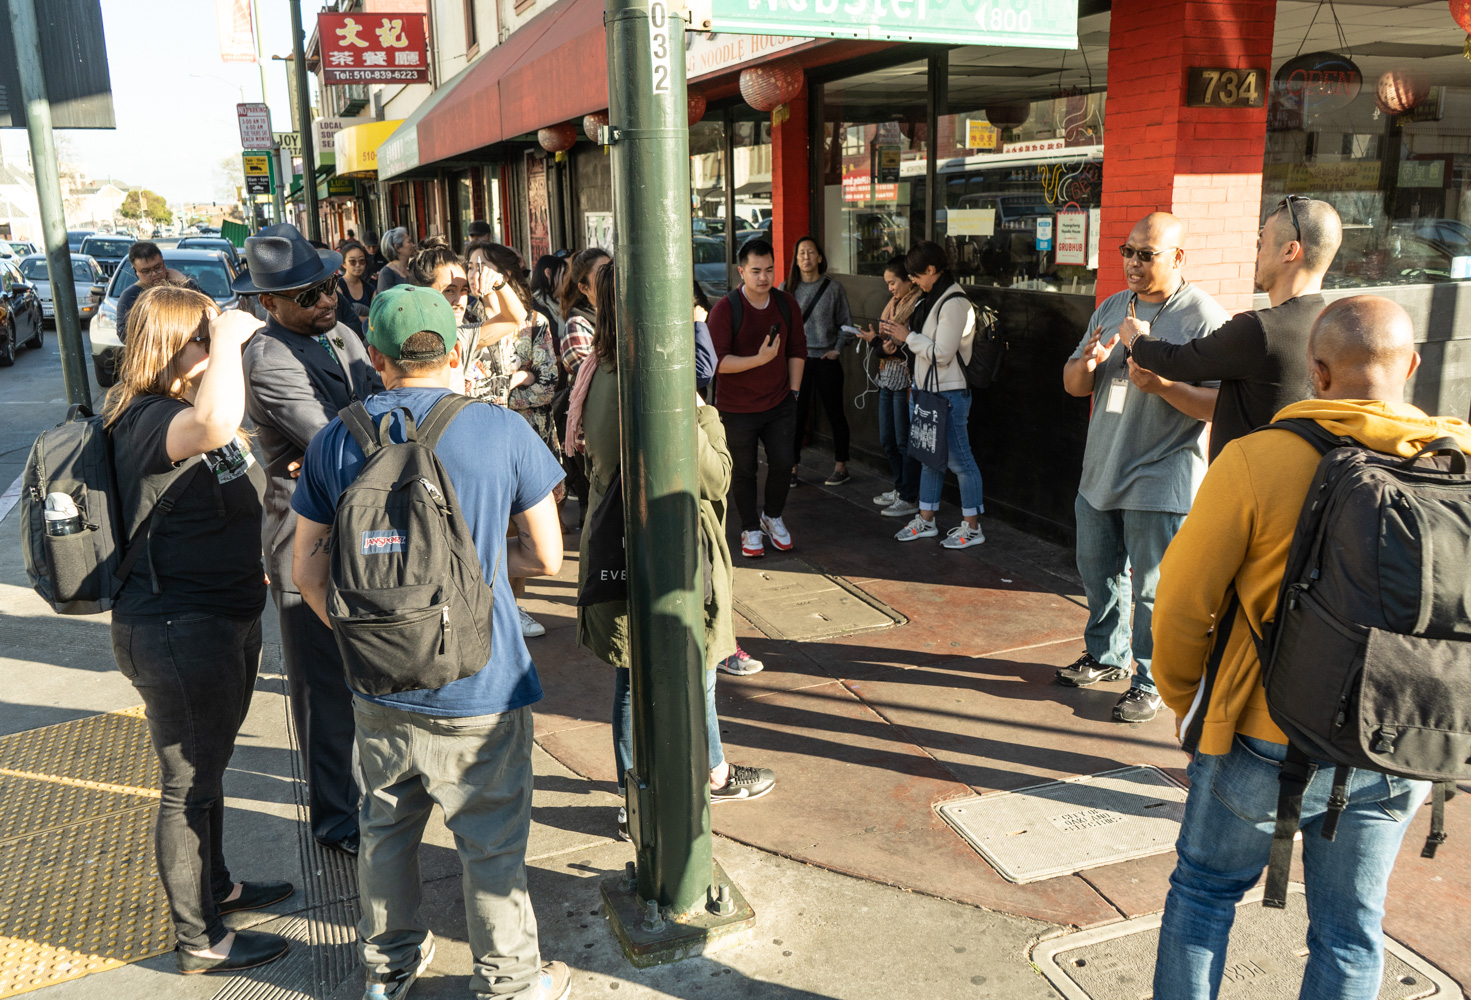 March 11, 2020: Guided tour of Chinatown outside Huangcheng Noodle House, 734 Webster Street, Oakland, California. © Camilo José Vergara